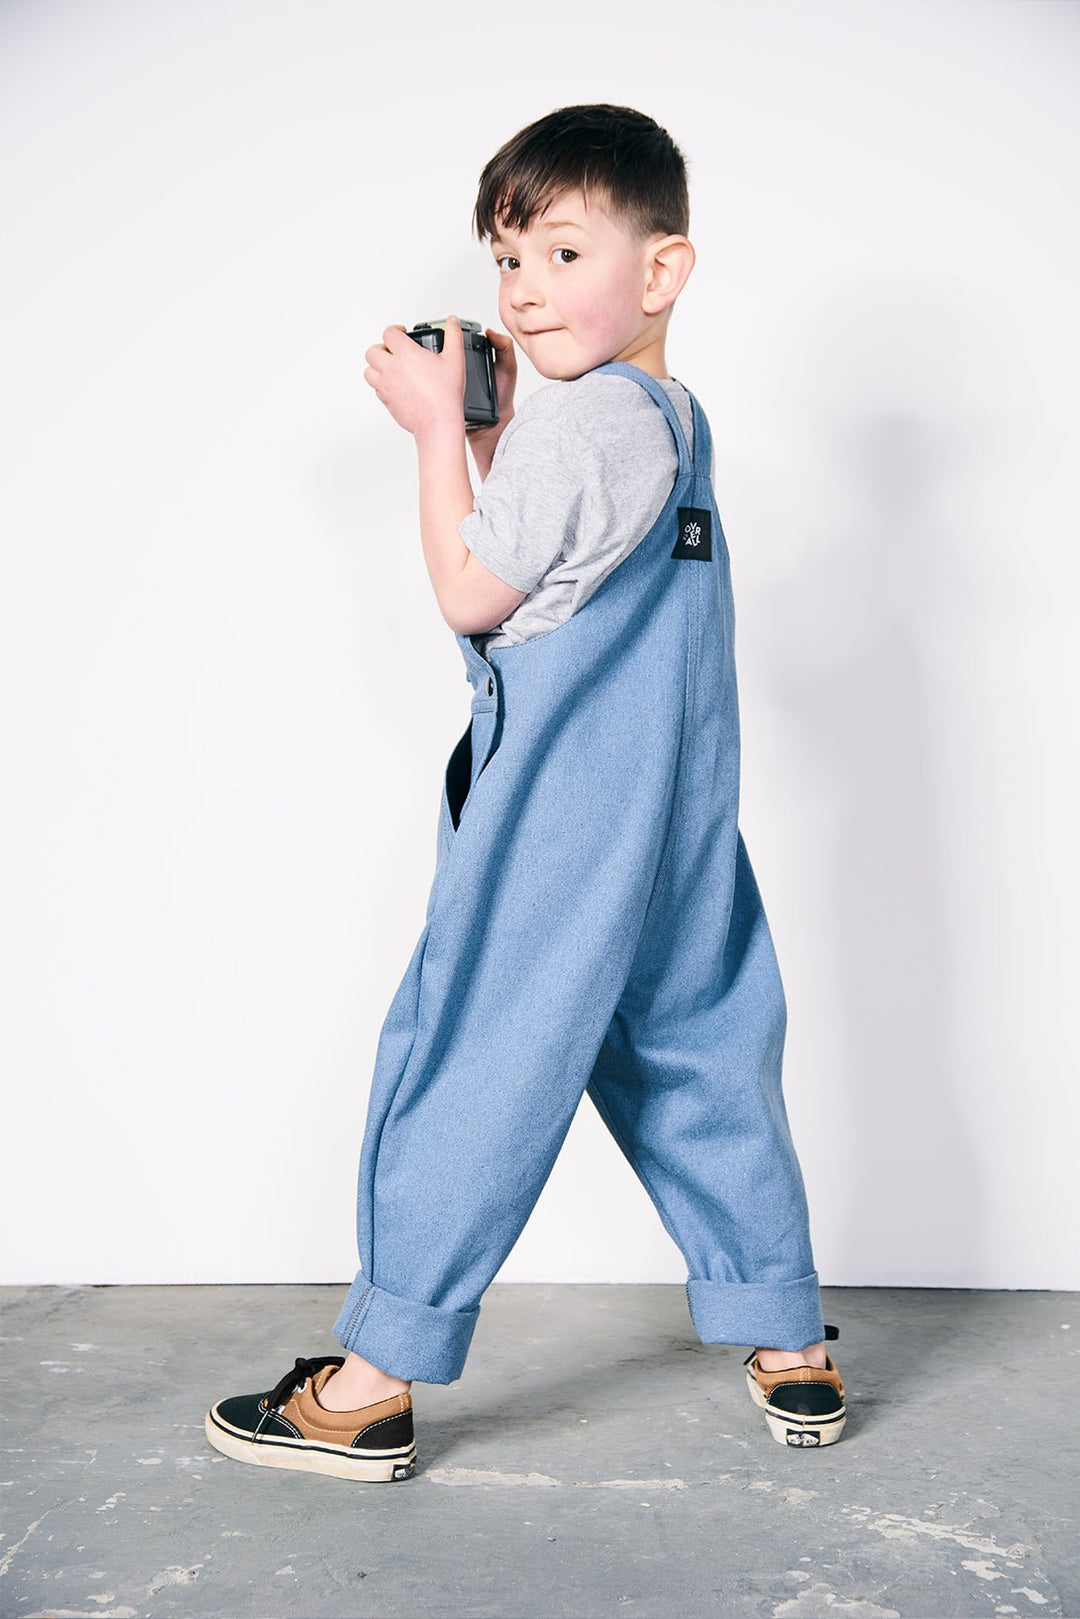 Overalls [unisex kids dungarees handmade in recycled denim] - Over All 1516